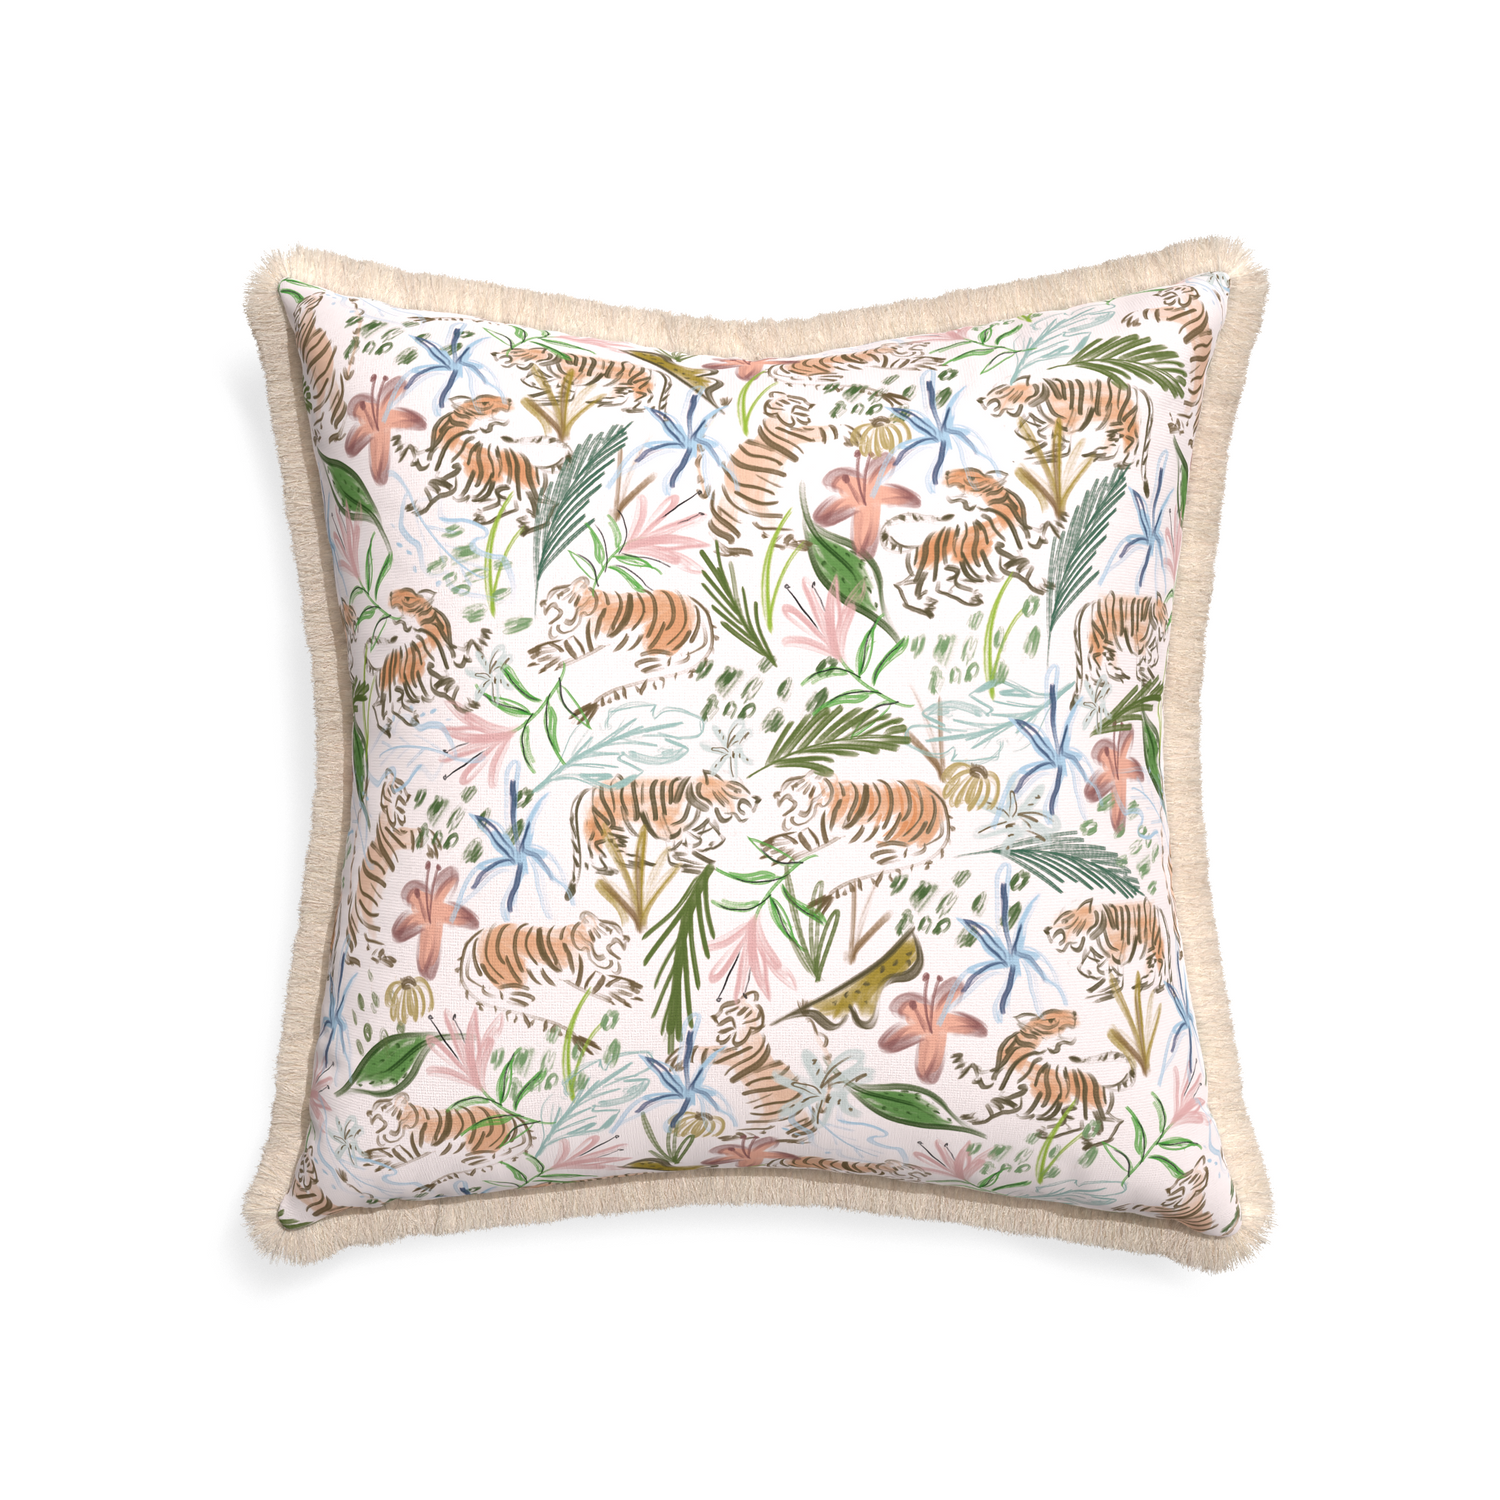 22-square frida pink custom pink chinoiserie tigerpillow with cream fringe on white background